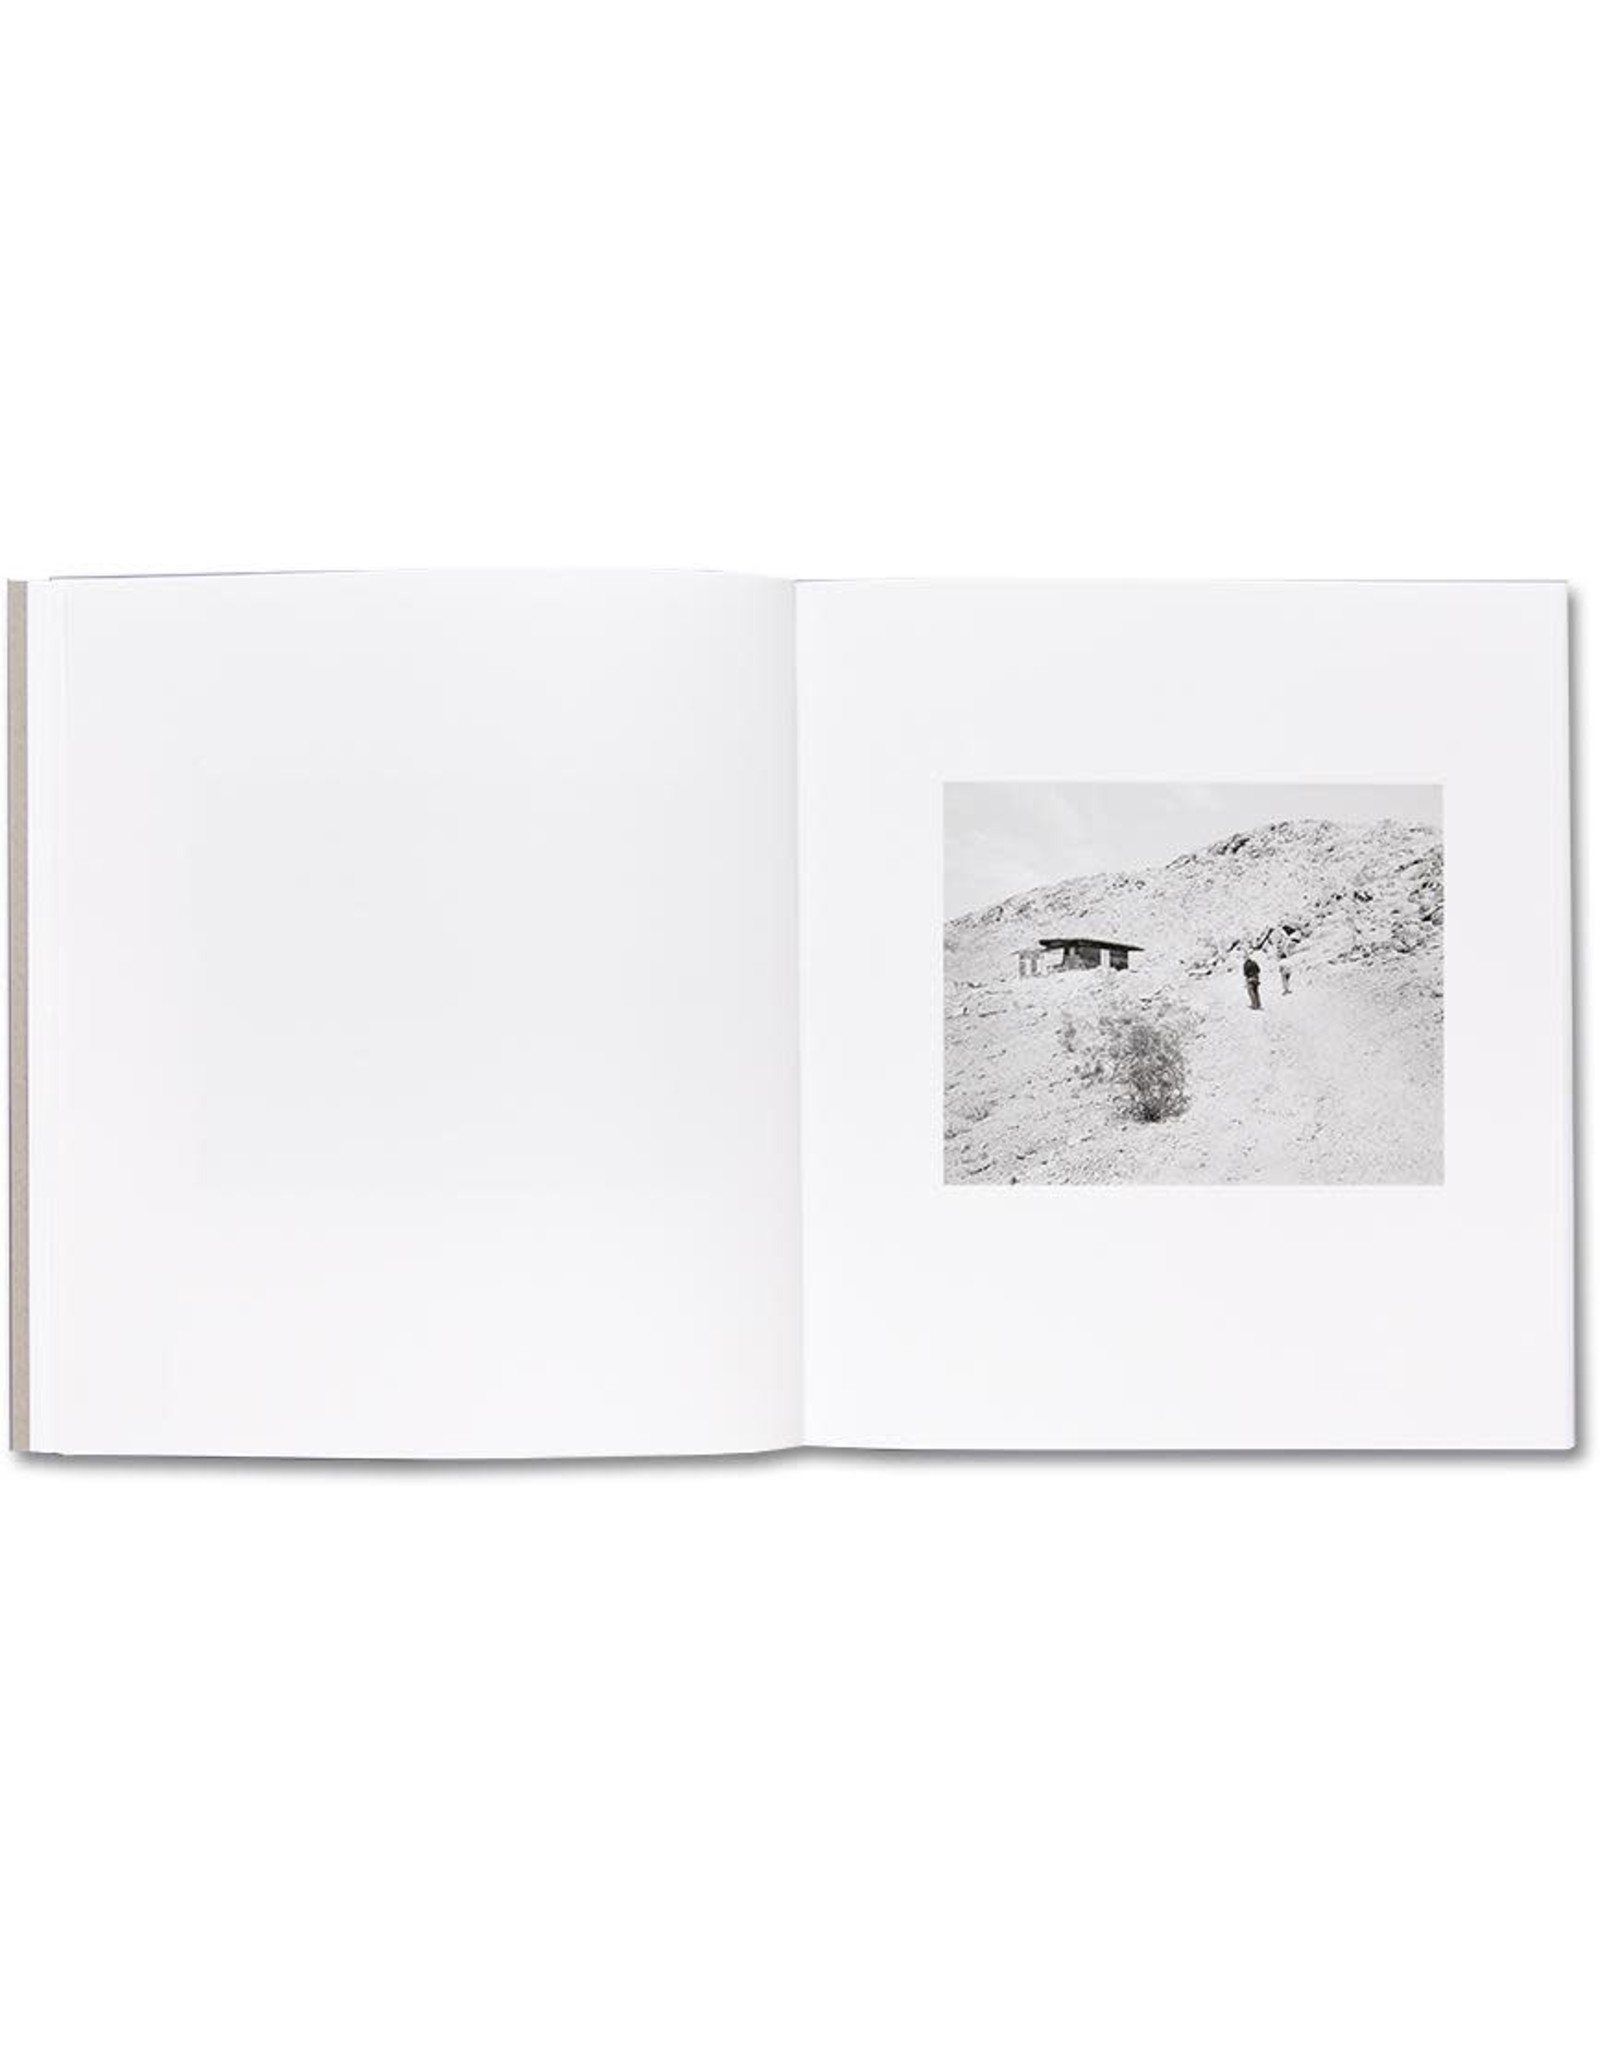 Susan Lipper: Domesticated Land (Signed)